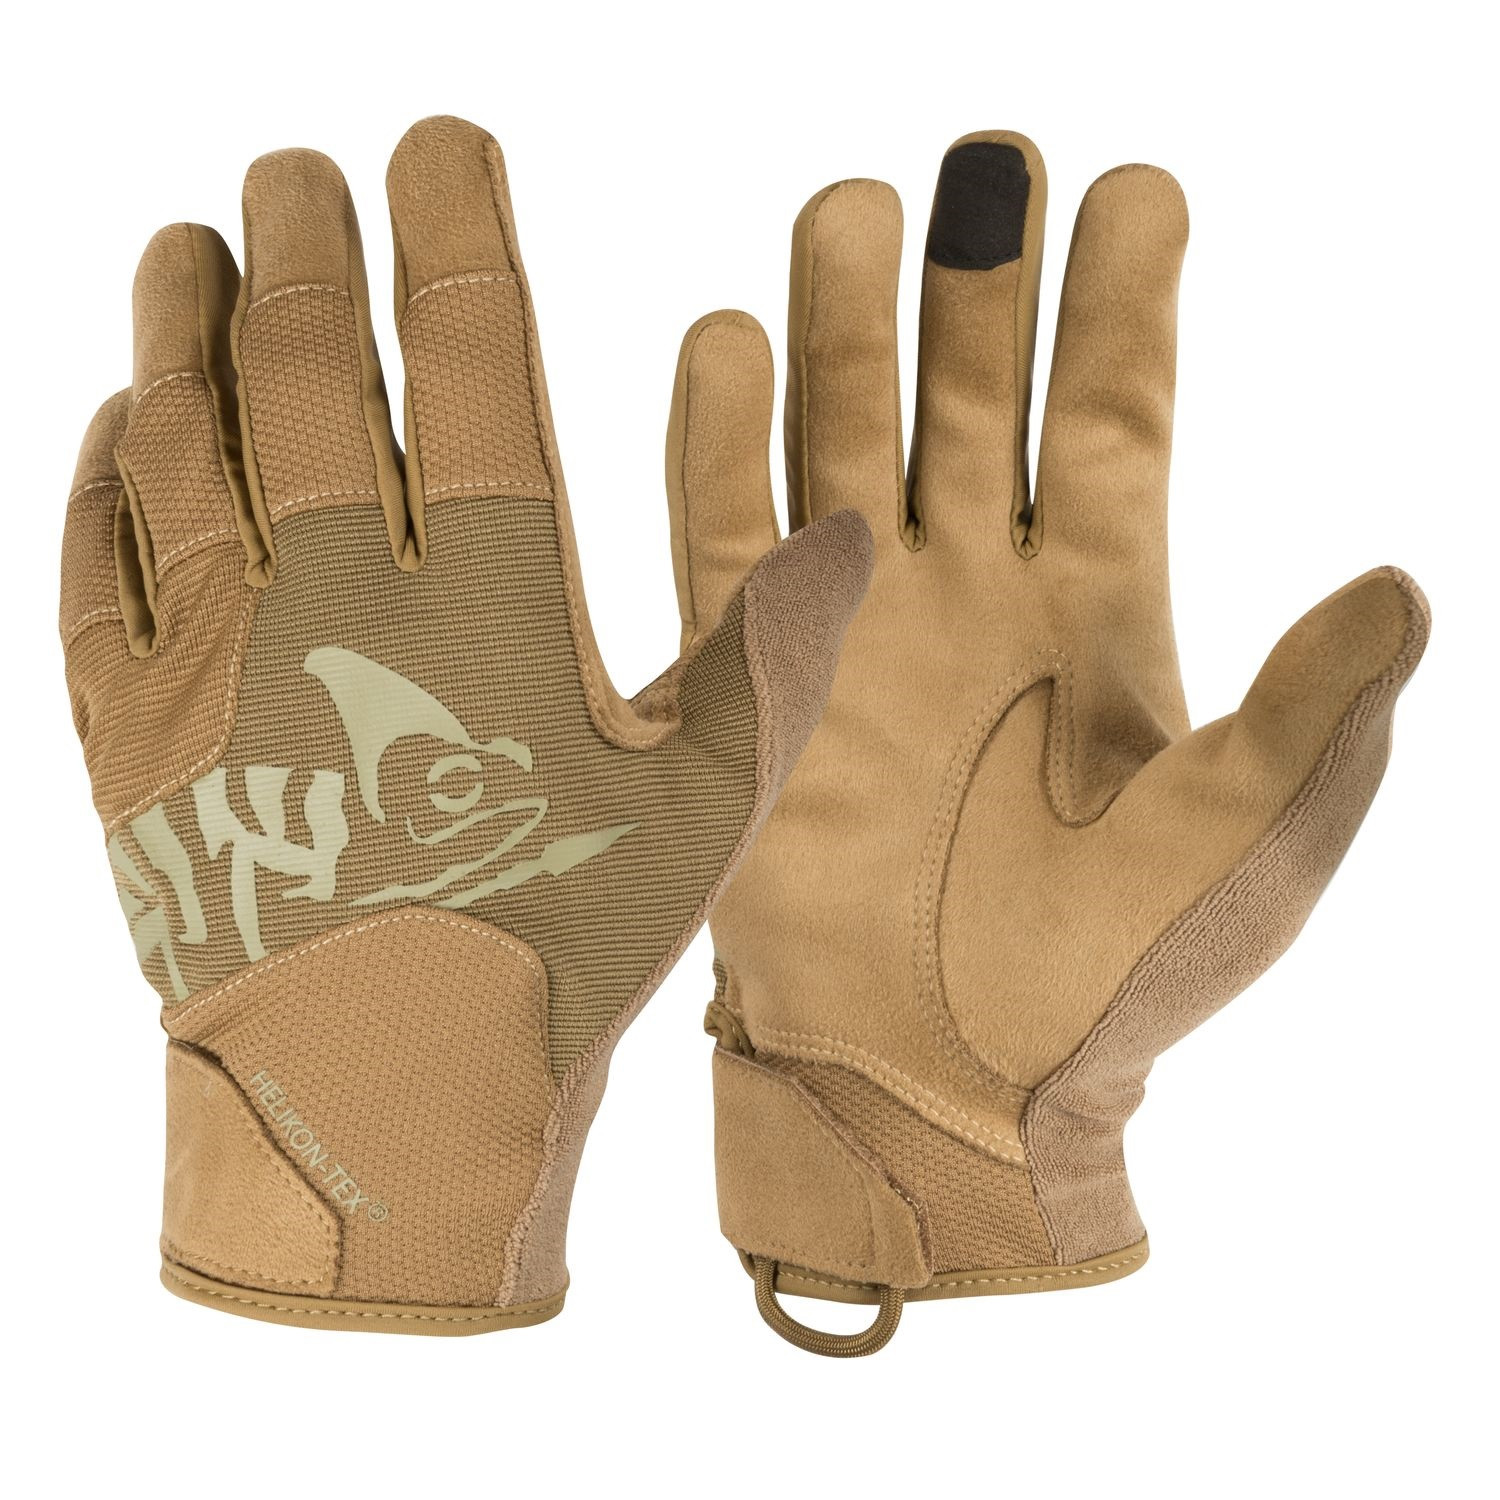 all-round-tactical-gloves-coyote-adaptive-green-size-m